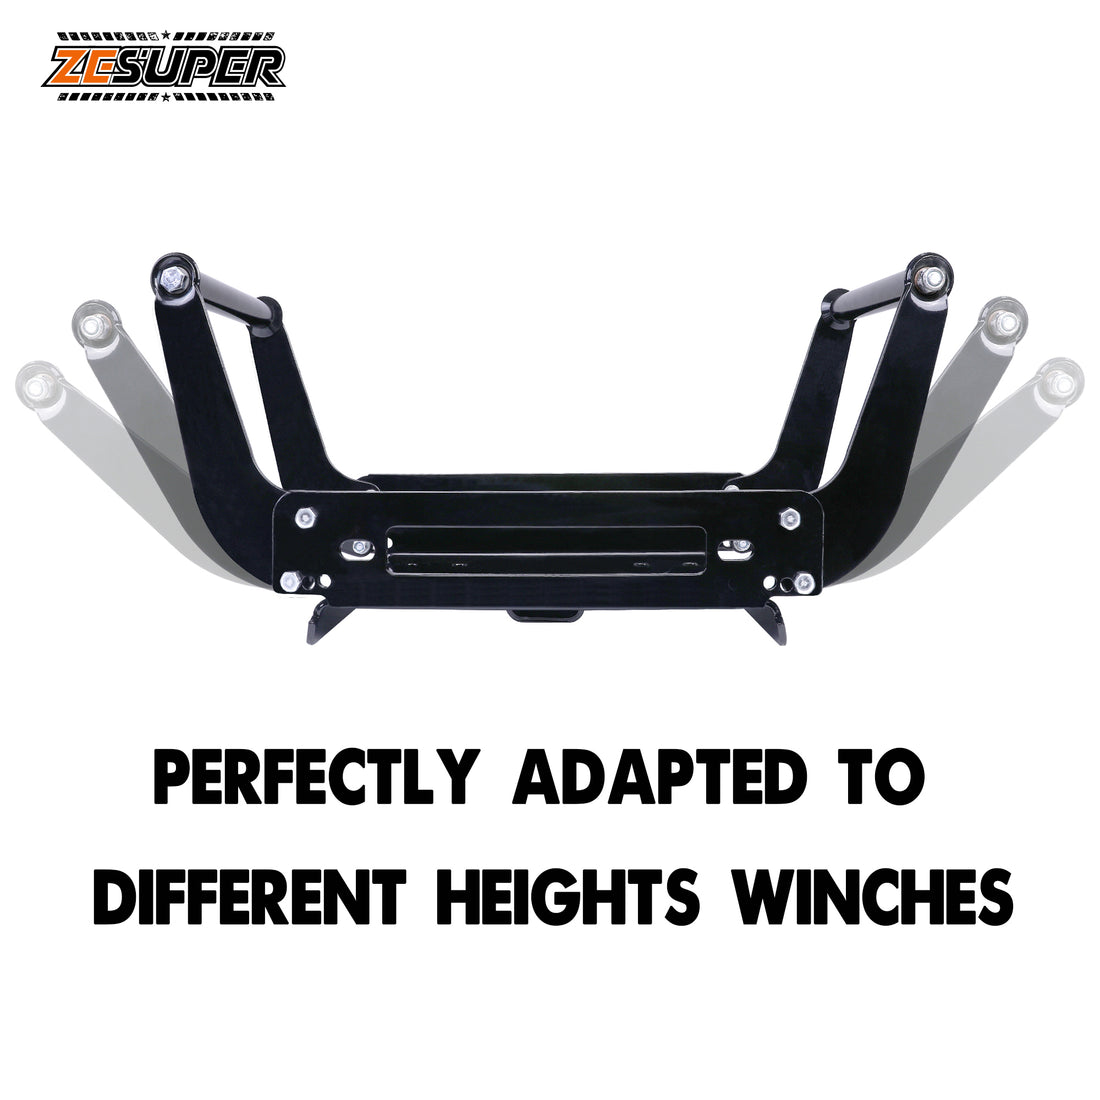 Ze Winch Cradle Mounting Bracket Mount Plate For